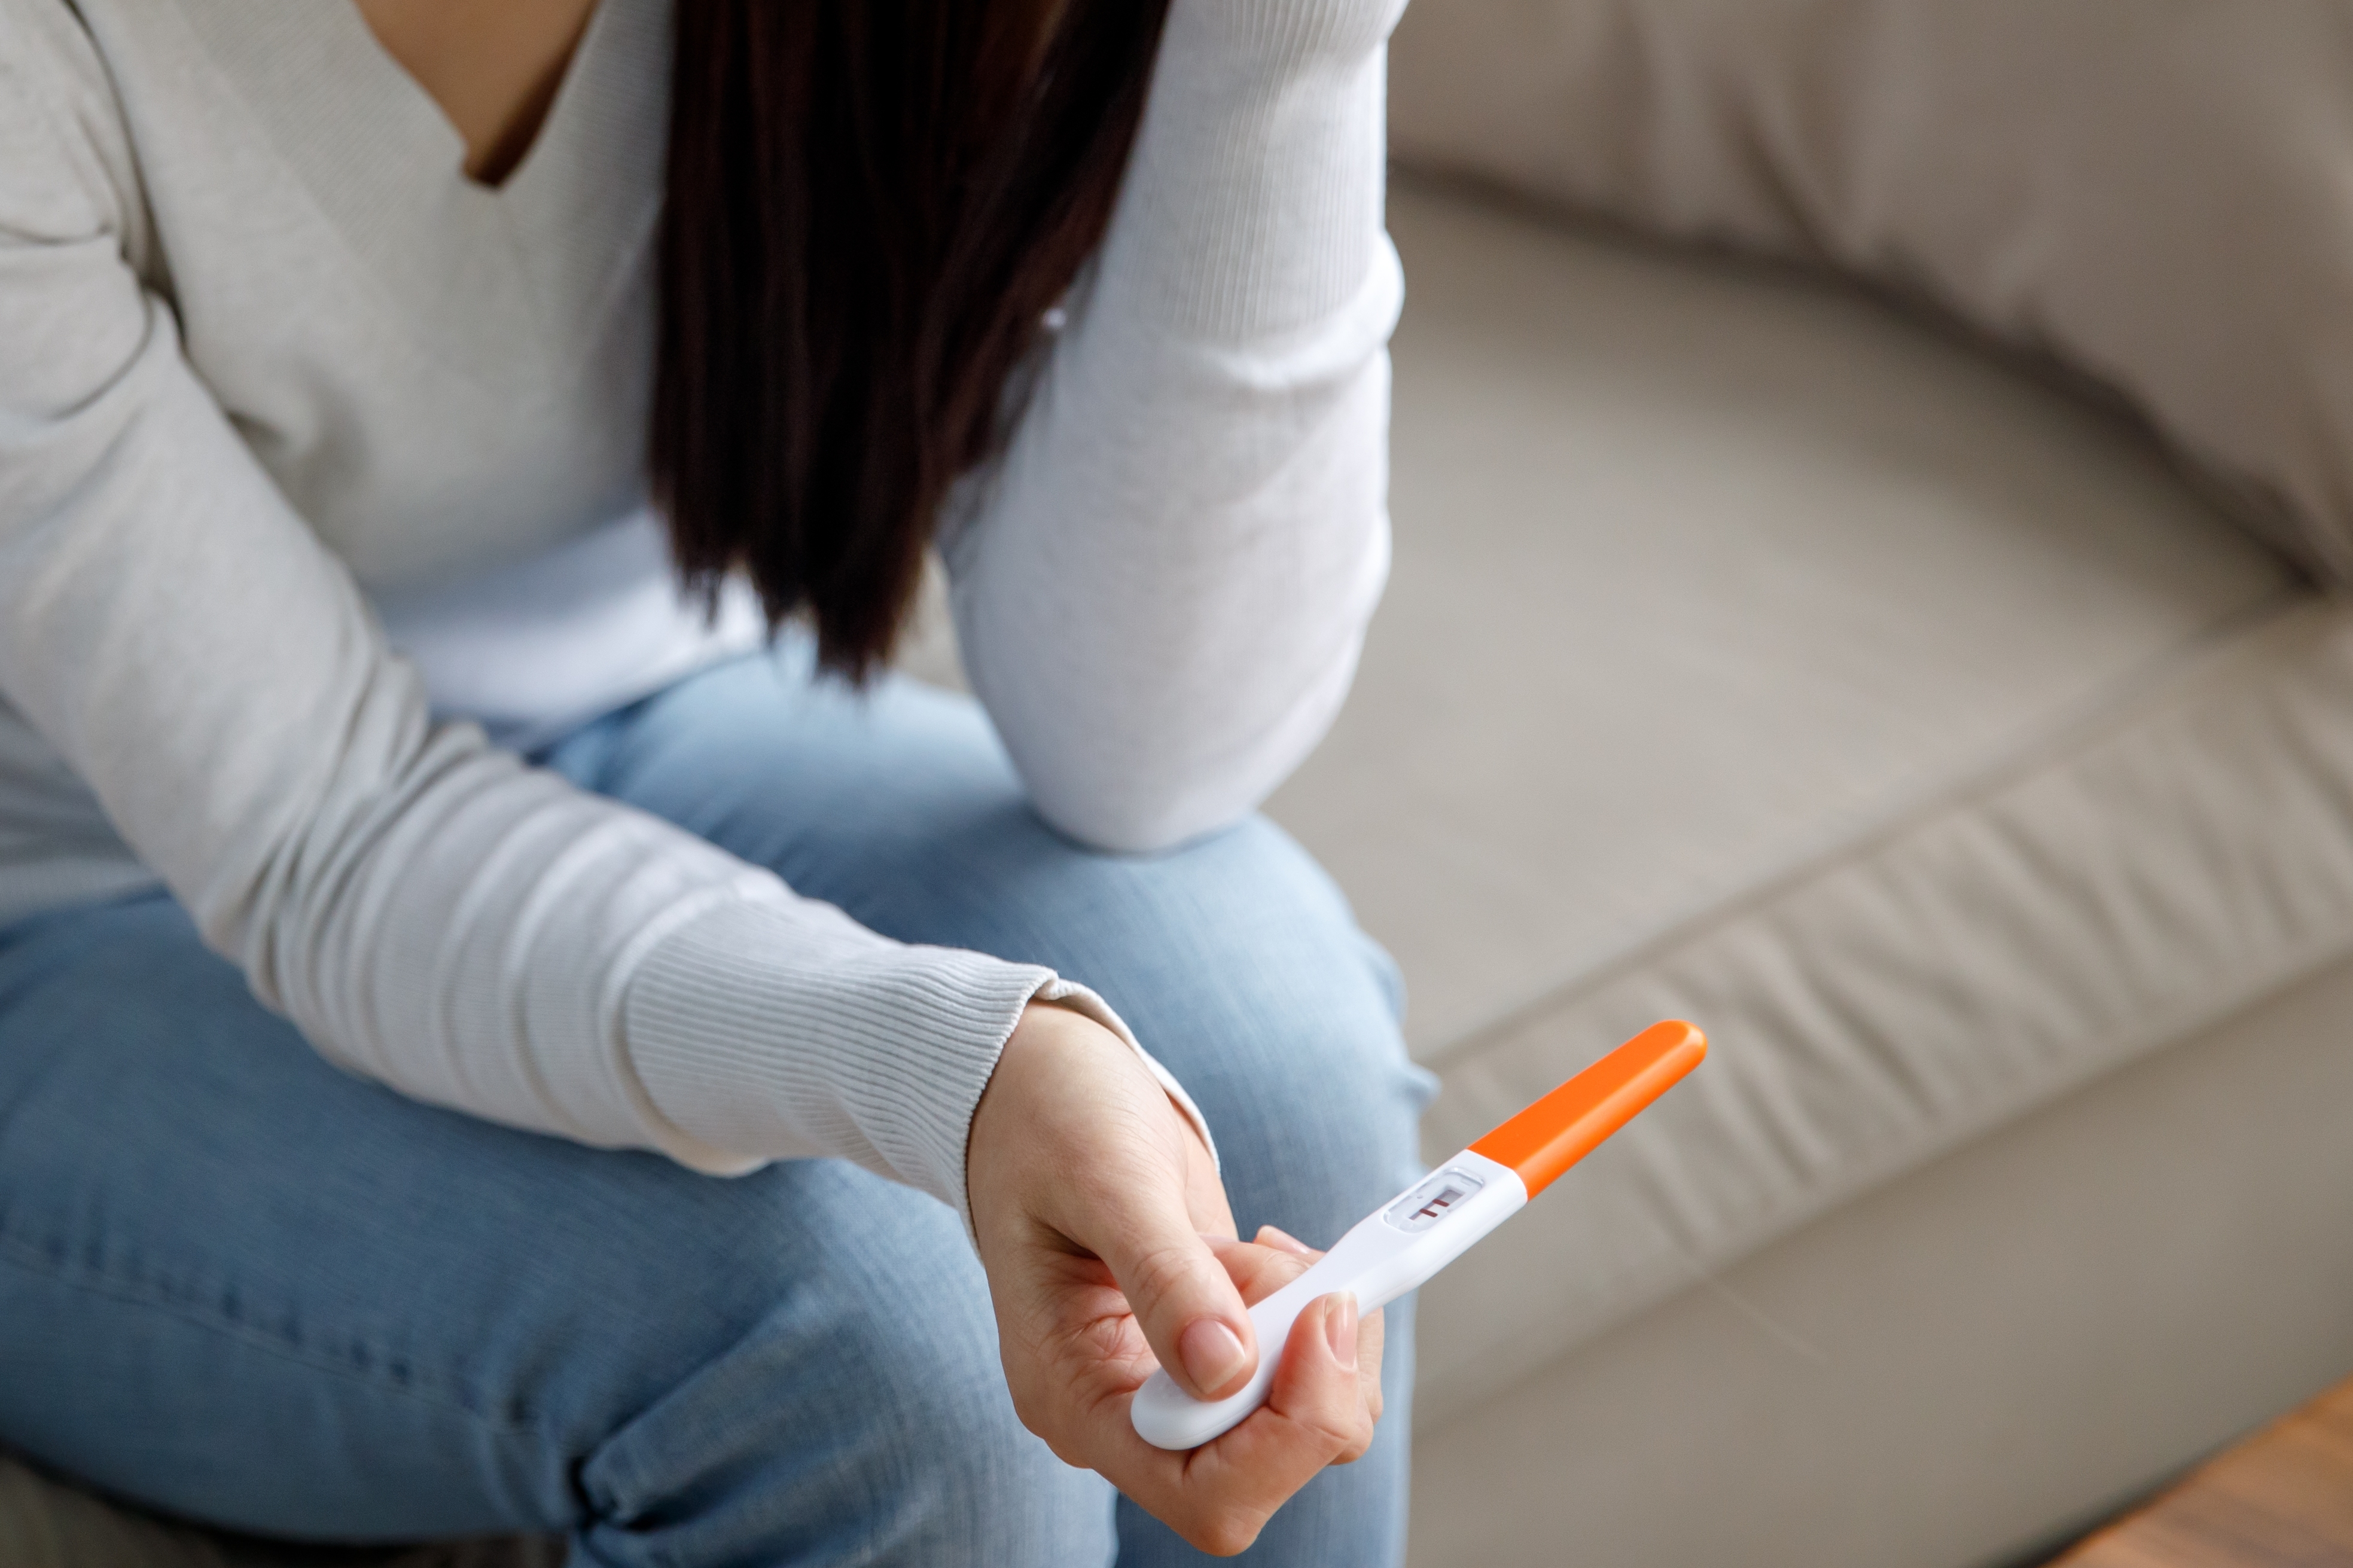 A woman holding a pregnancy test  | Source: Shutterstock